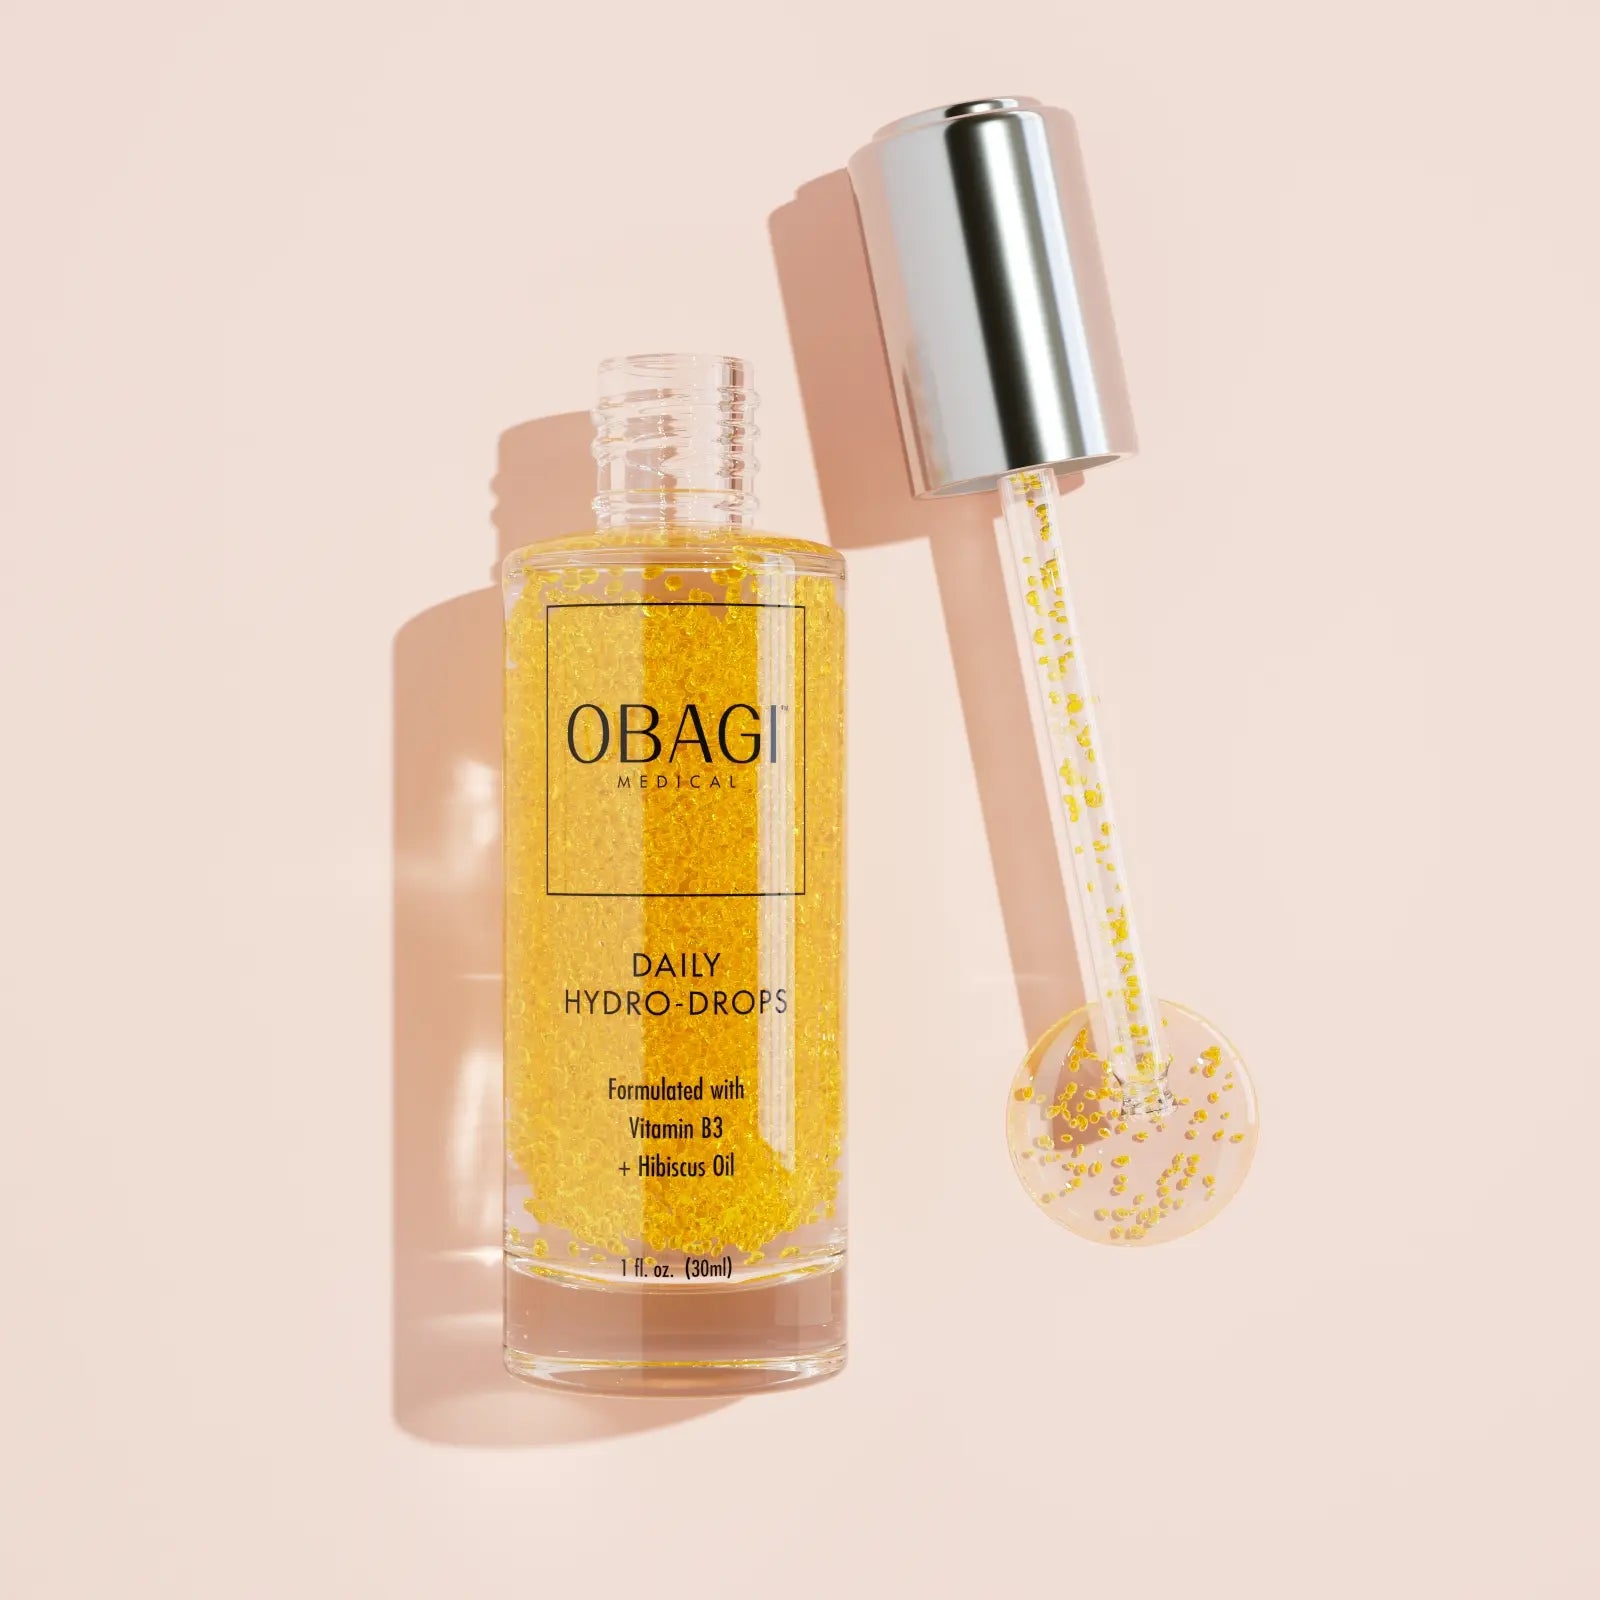 Obagi Daily Hydro-Drops SkinShop.ie